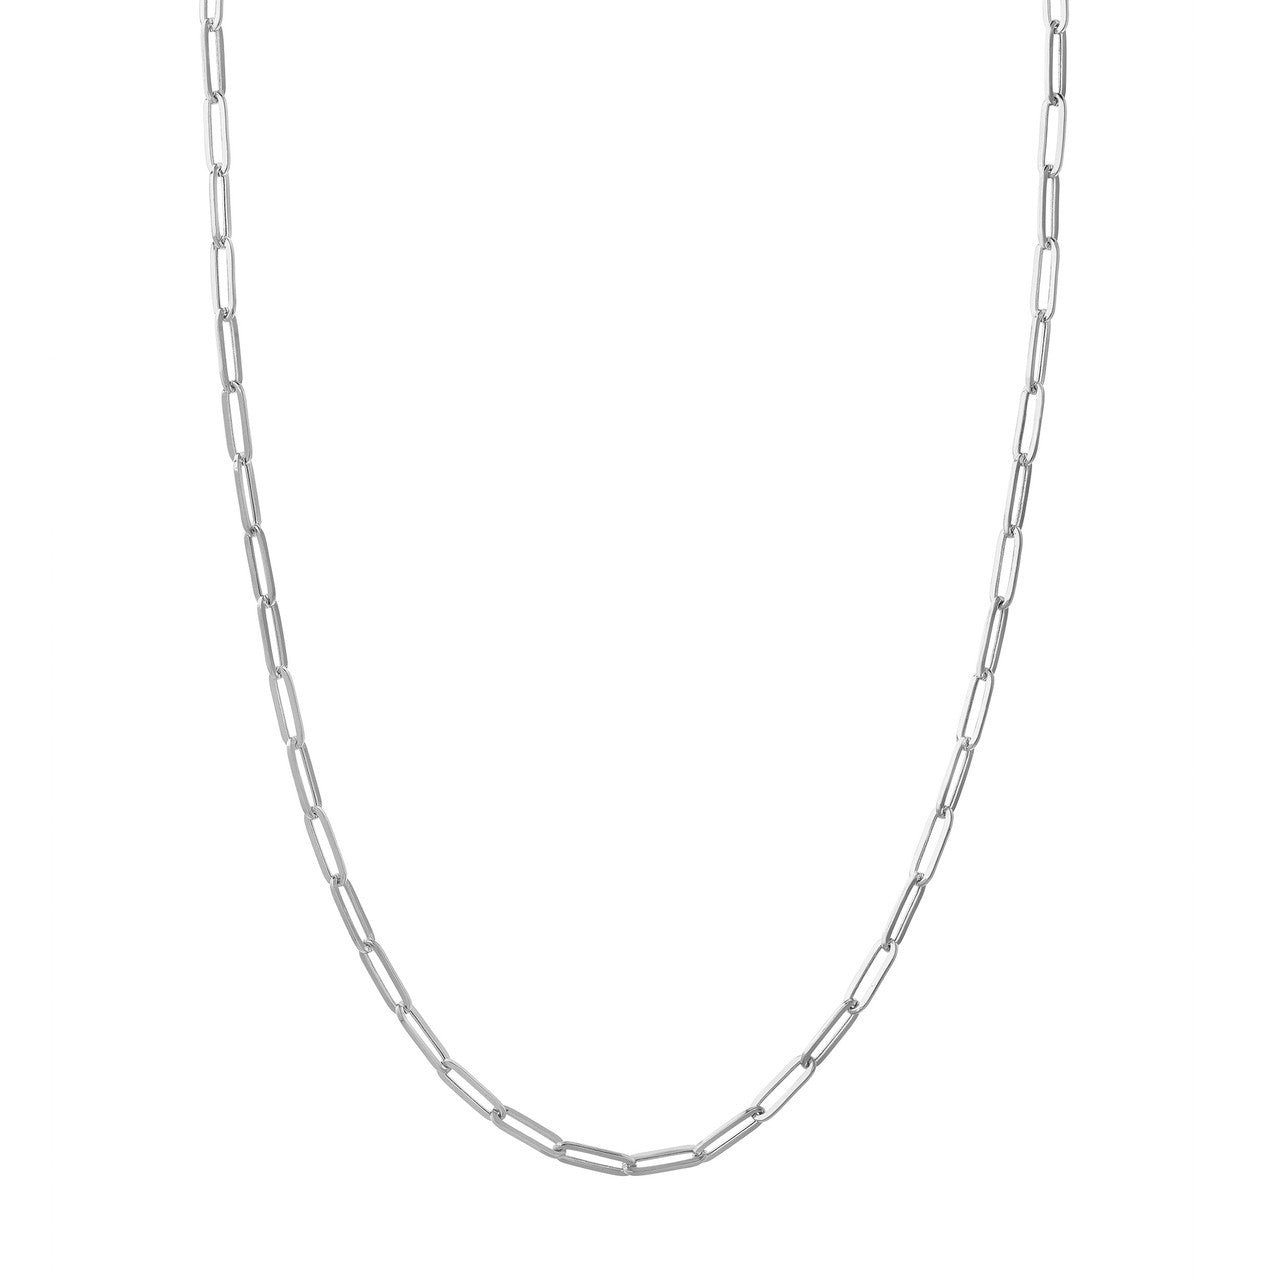 Amazon.com: LoveBling 14k Yellow Gold 5mm Paper Clip Link Necklace (14